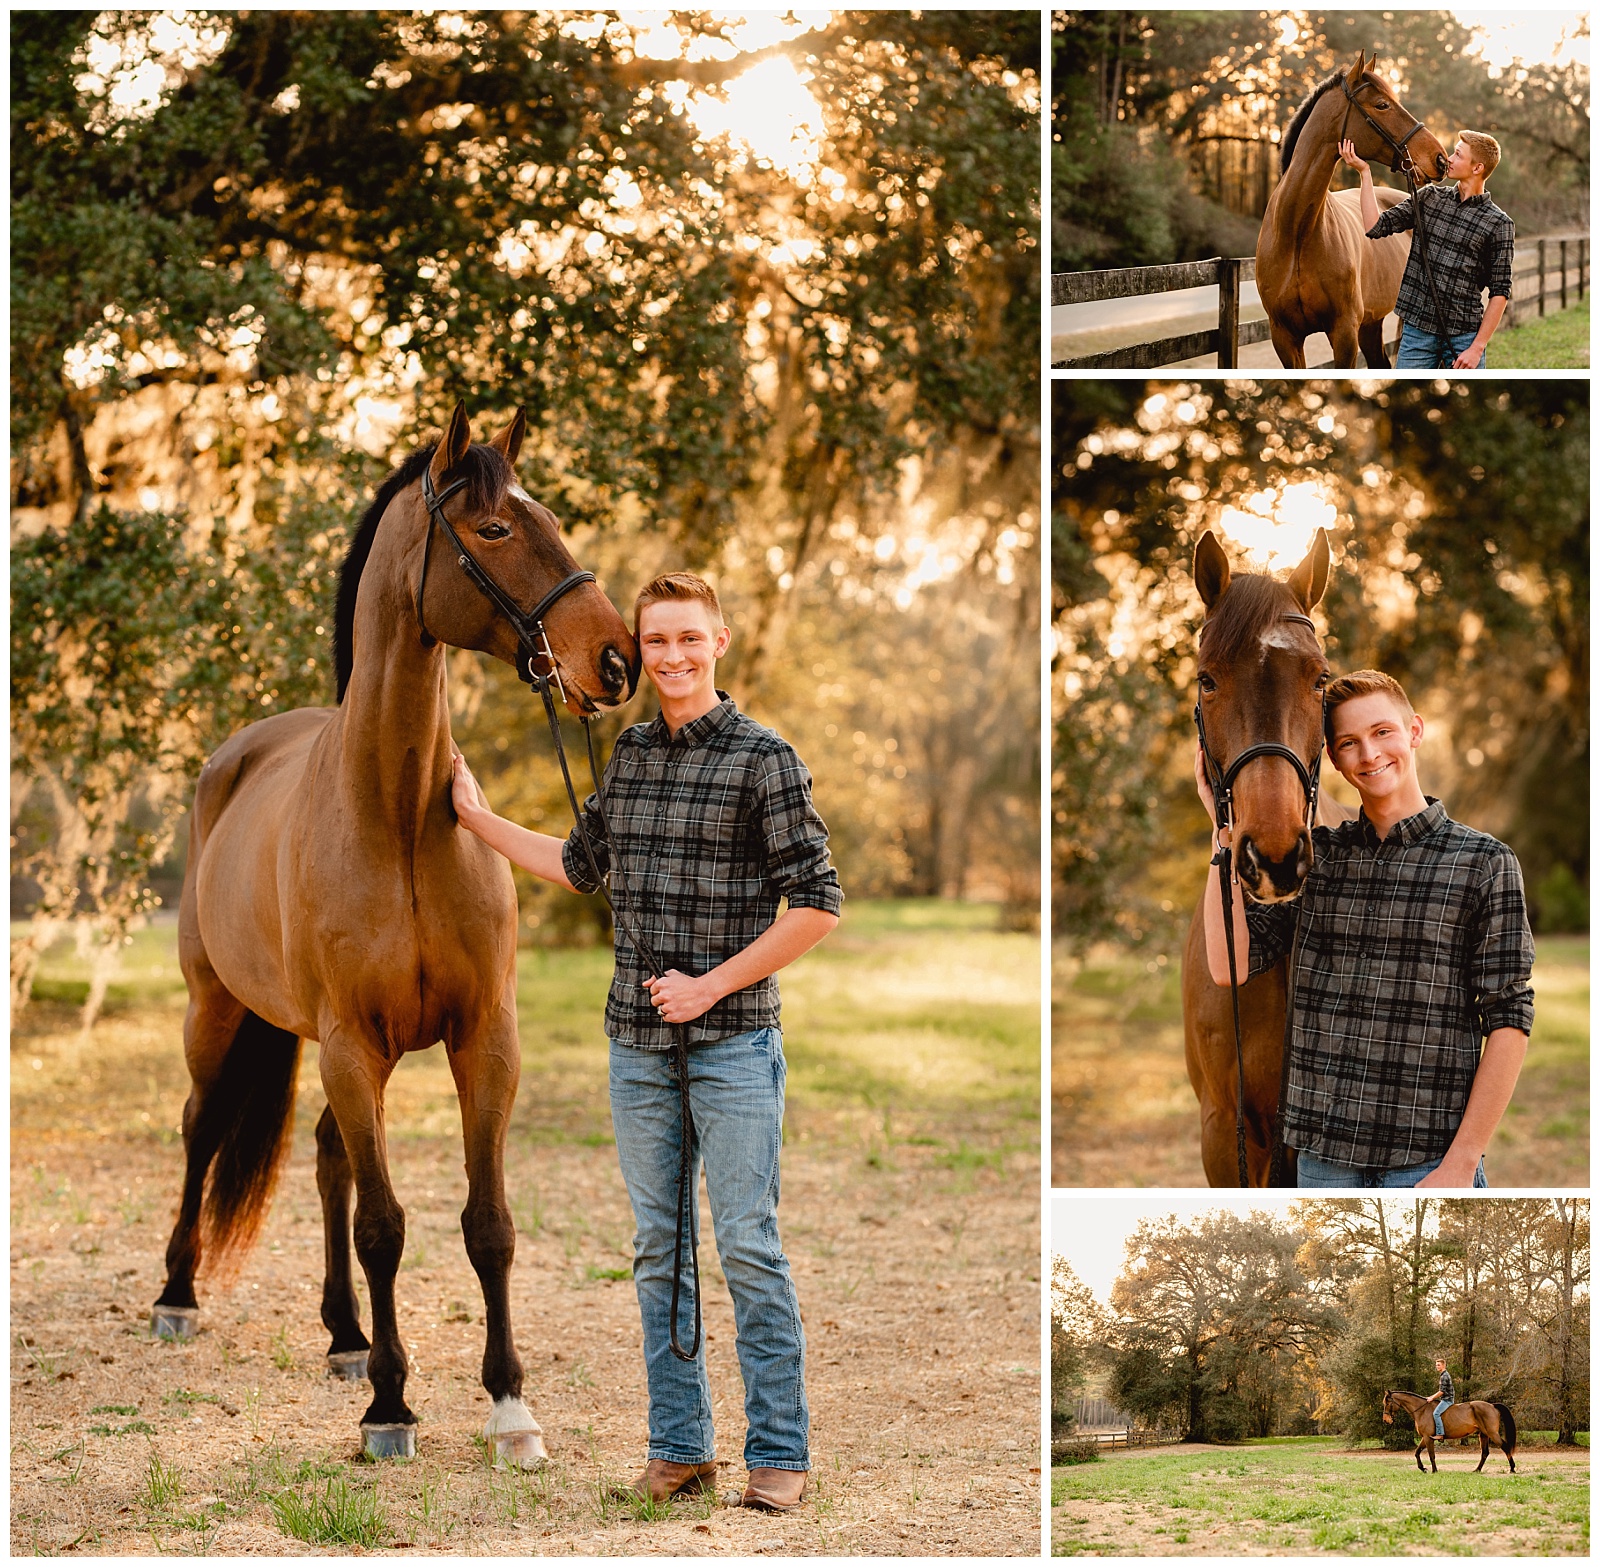 Boy and his horse take equestrian horse and rider pictures together at Cavallo Farms, near Tallahassee, Florida.